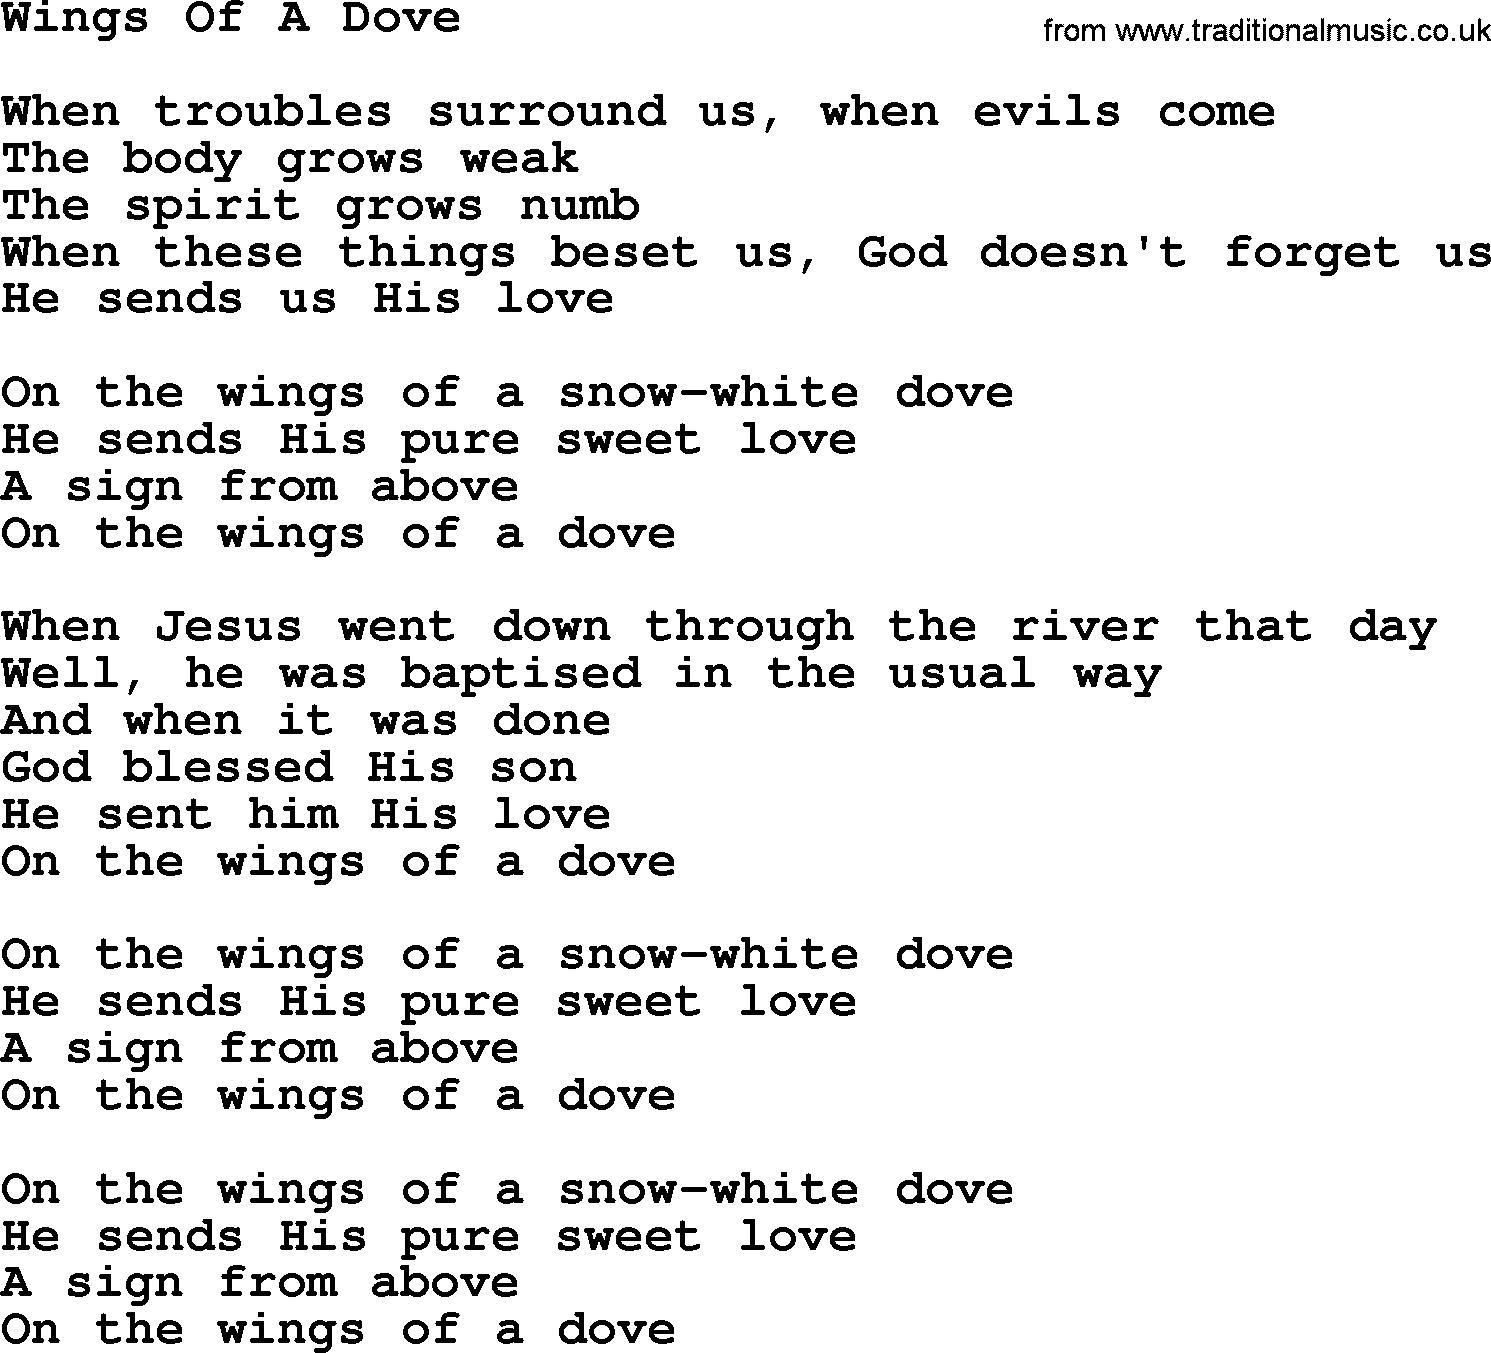 Dolly Parton song Wings Of A Dove.txt lyrics